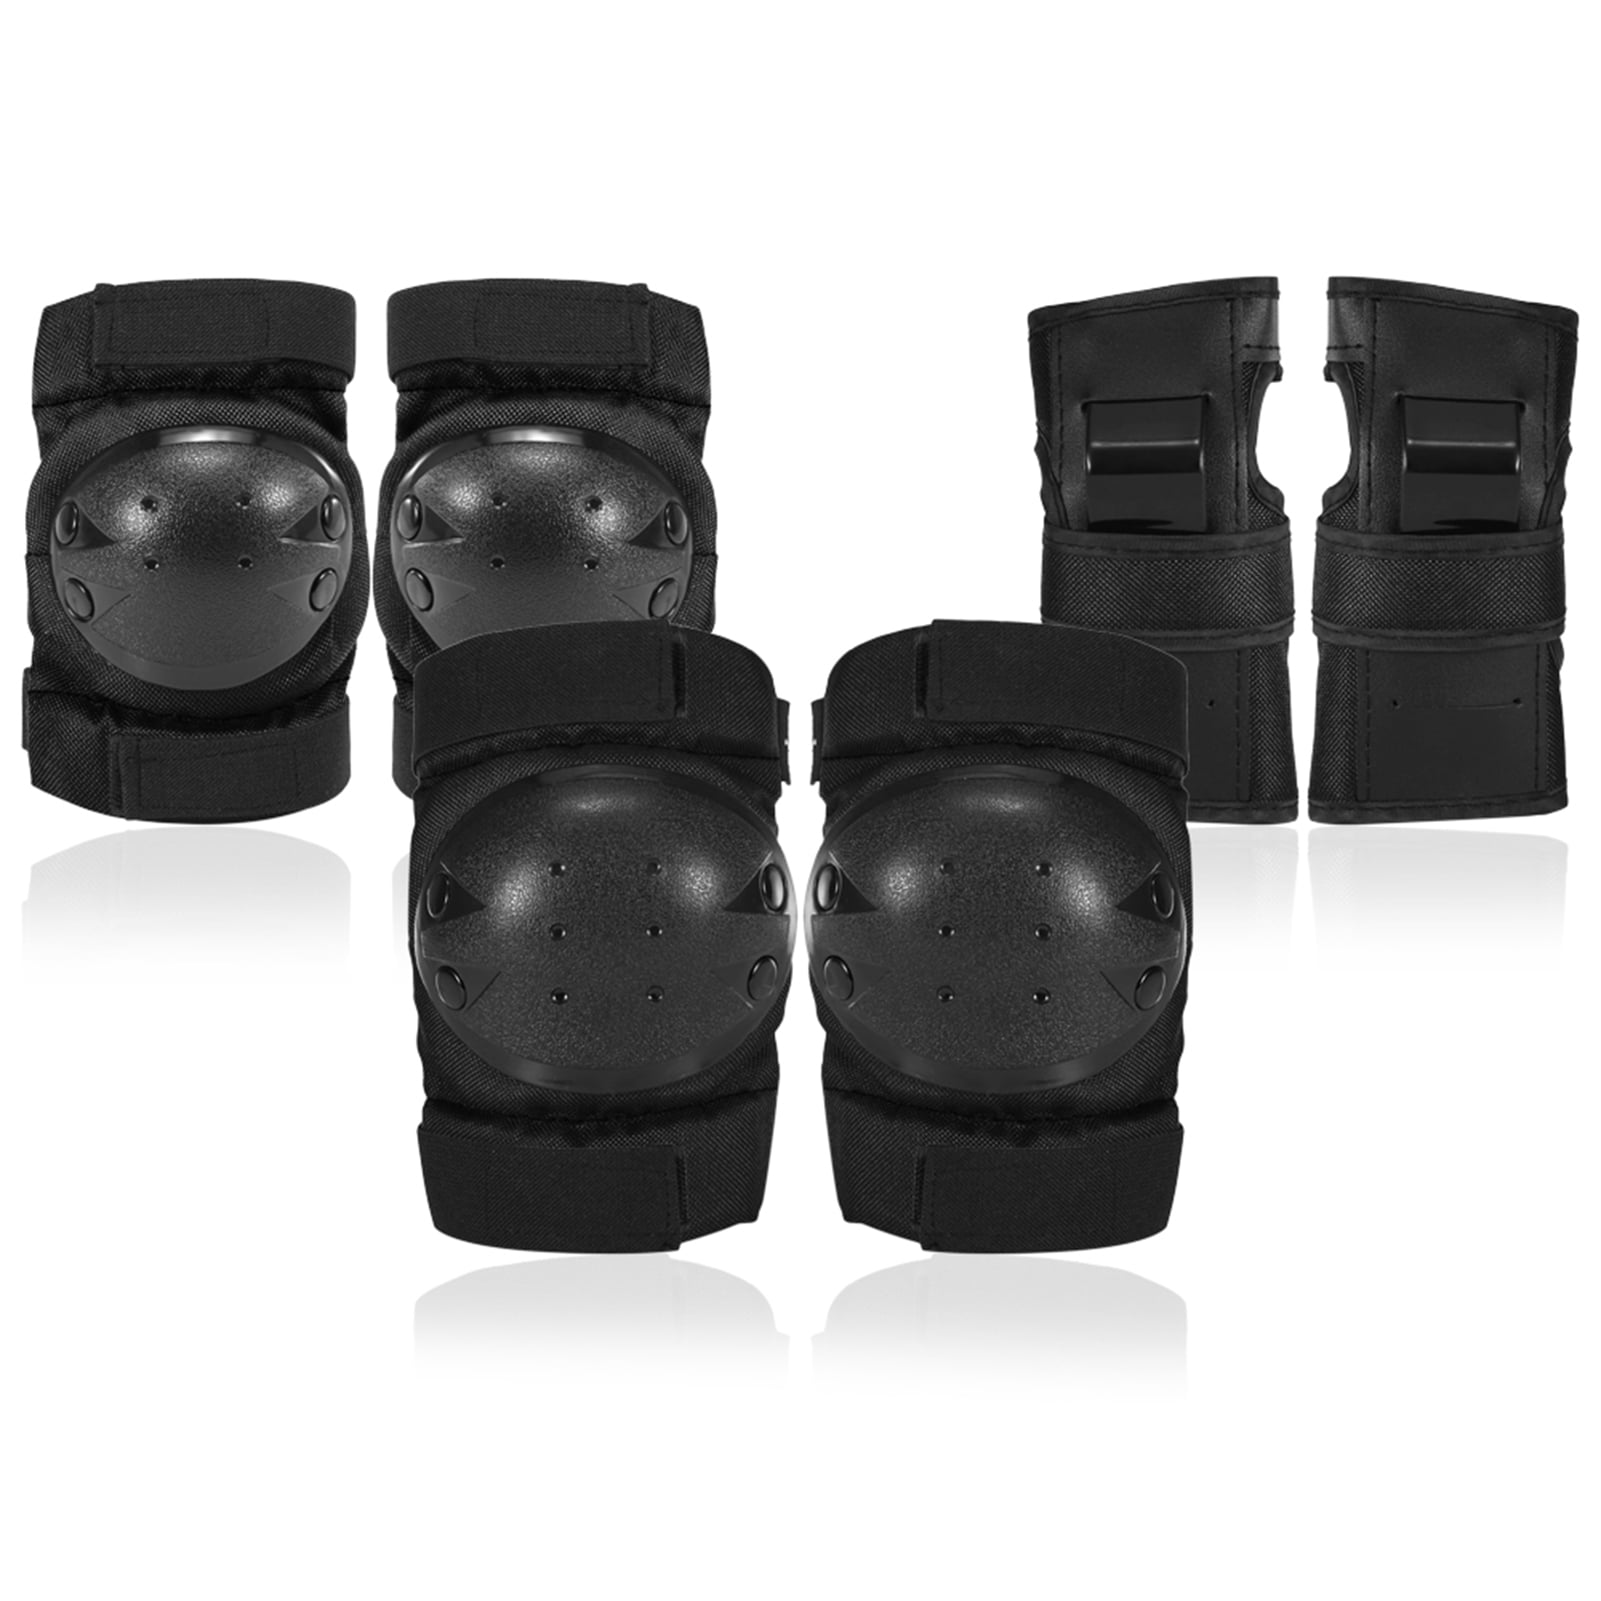 6 Knee Elbow Wrist Protective Pad Protector Gear Sports Tactical Skate Guard